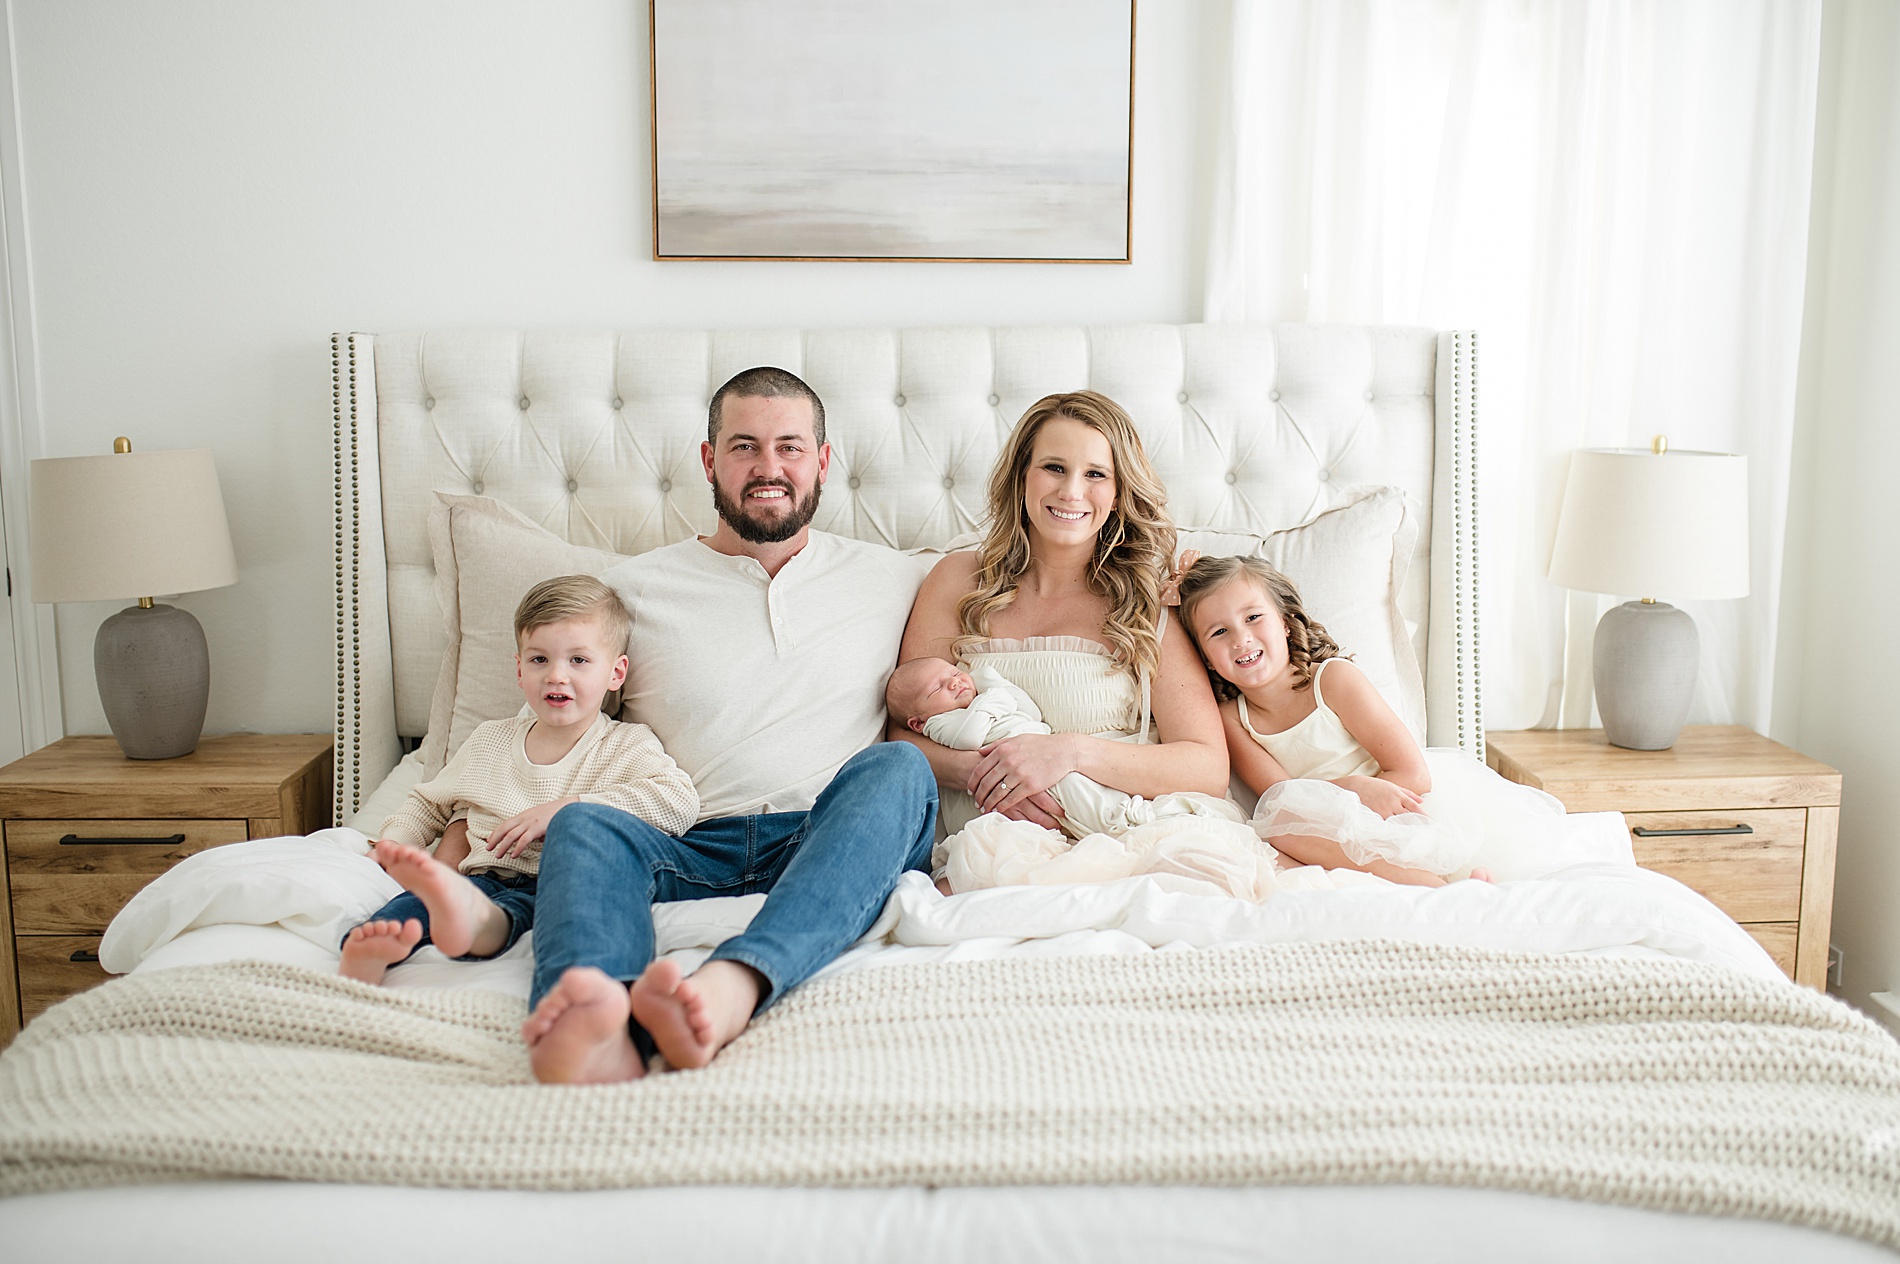 family portraits on bed taken by Lindsey Dutton Photography, a Dallas newborn photographer
